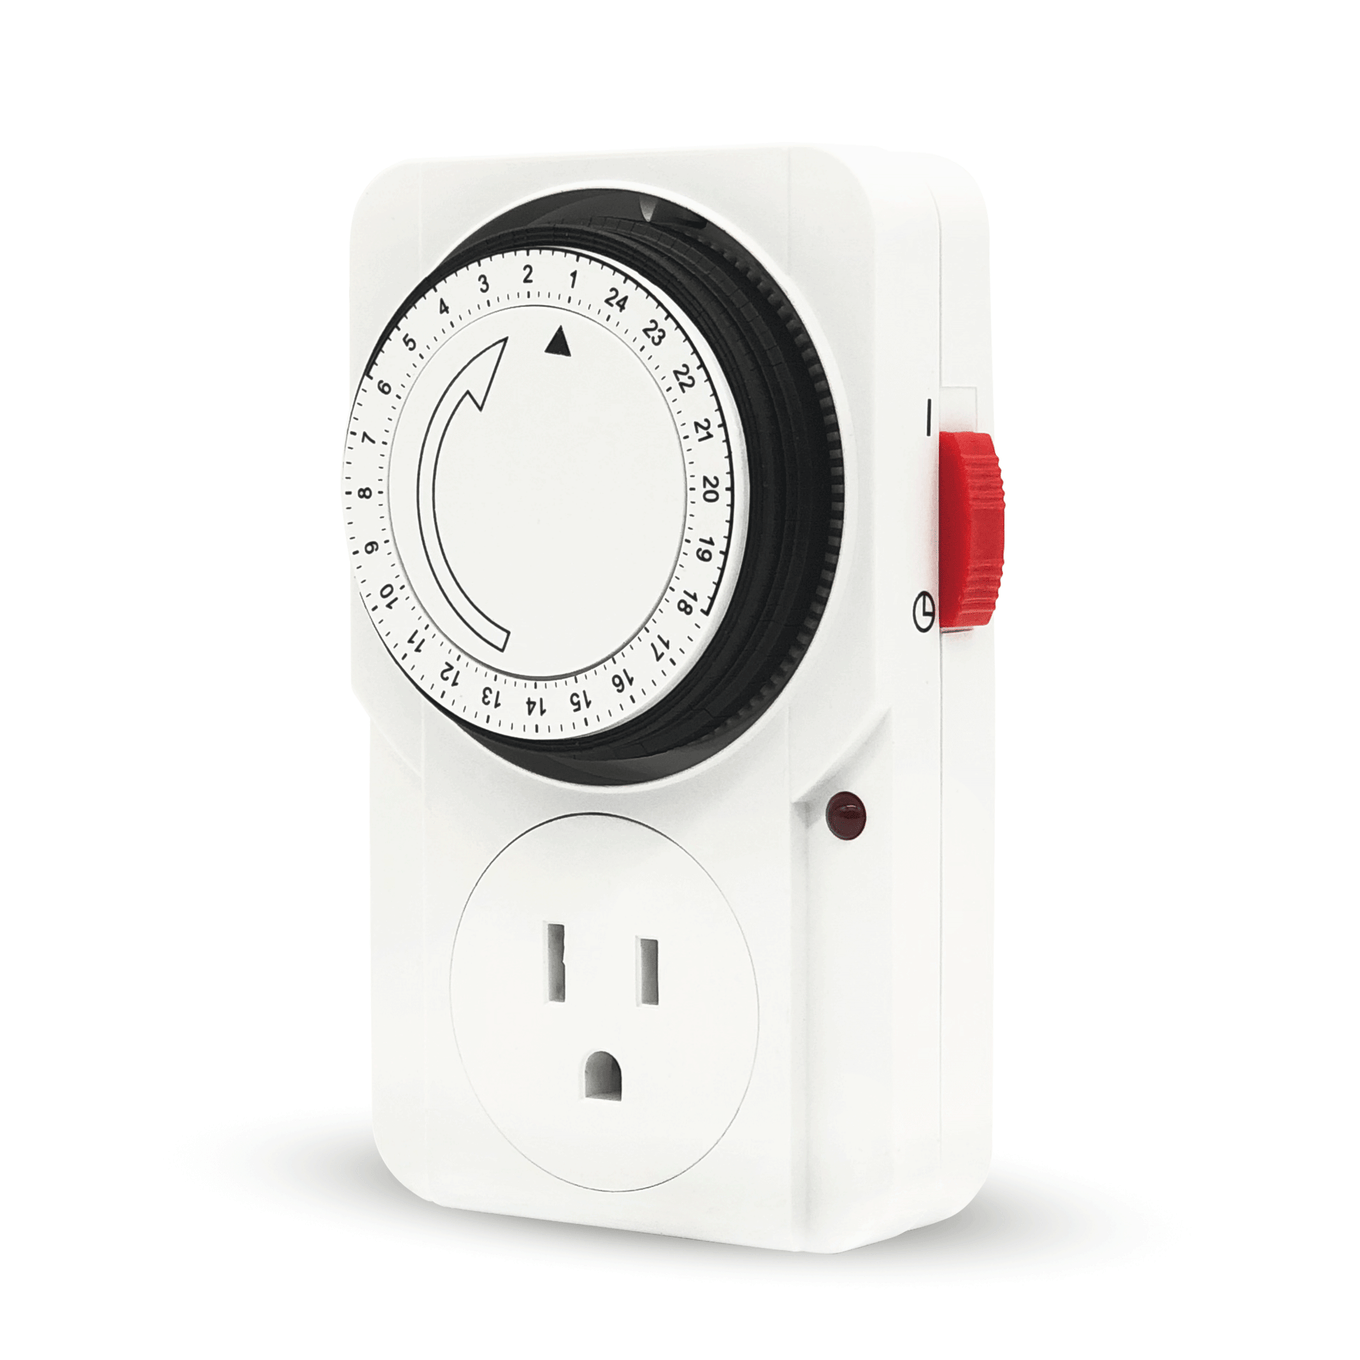 Jiffy Hydro Single Grounded Outlet Timer for Grow Lights, Pumps